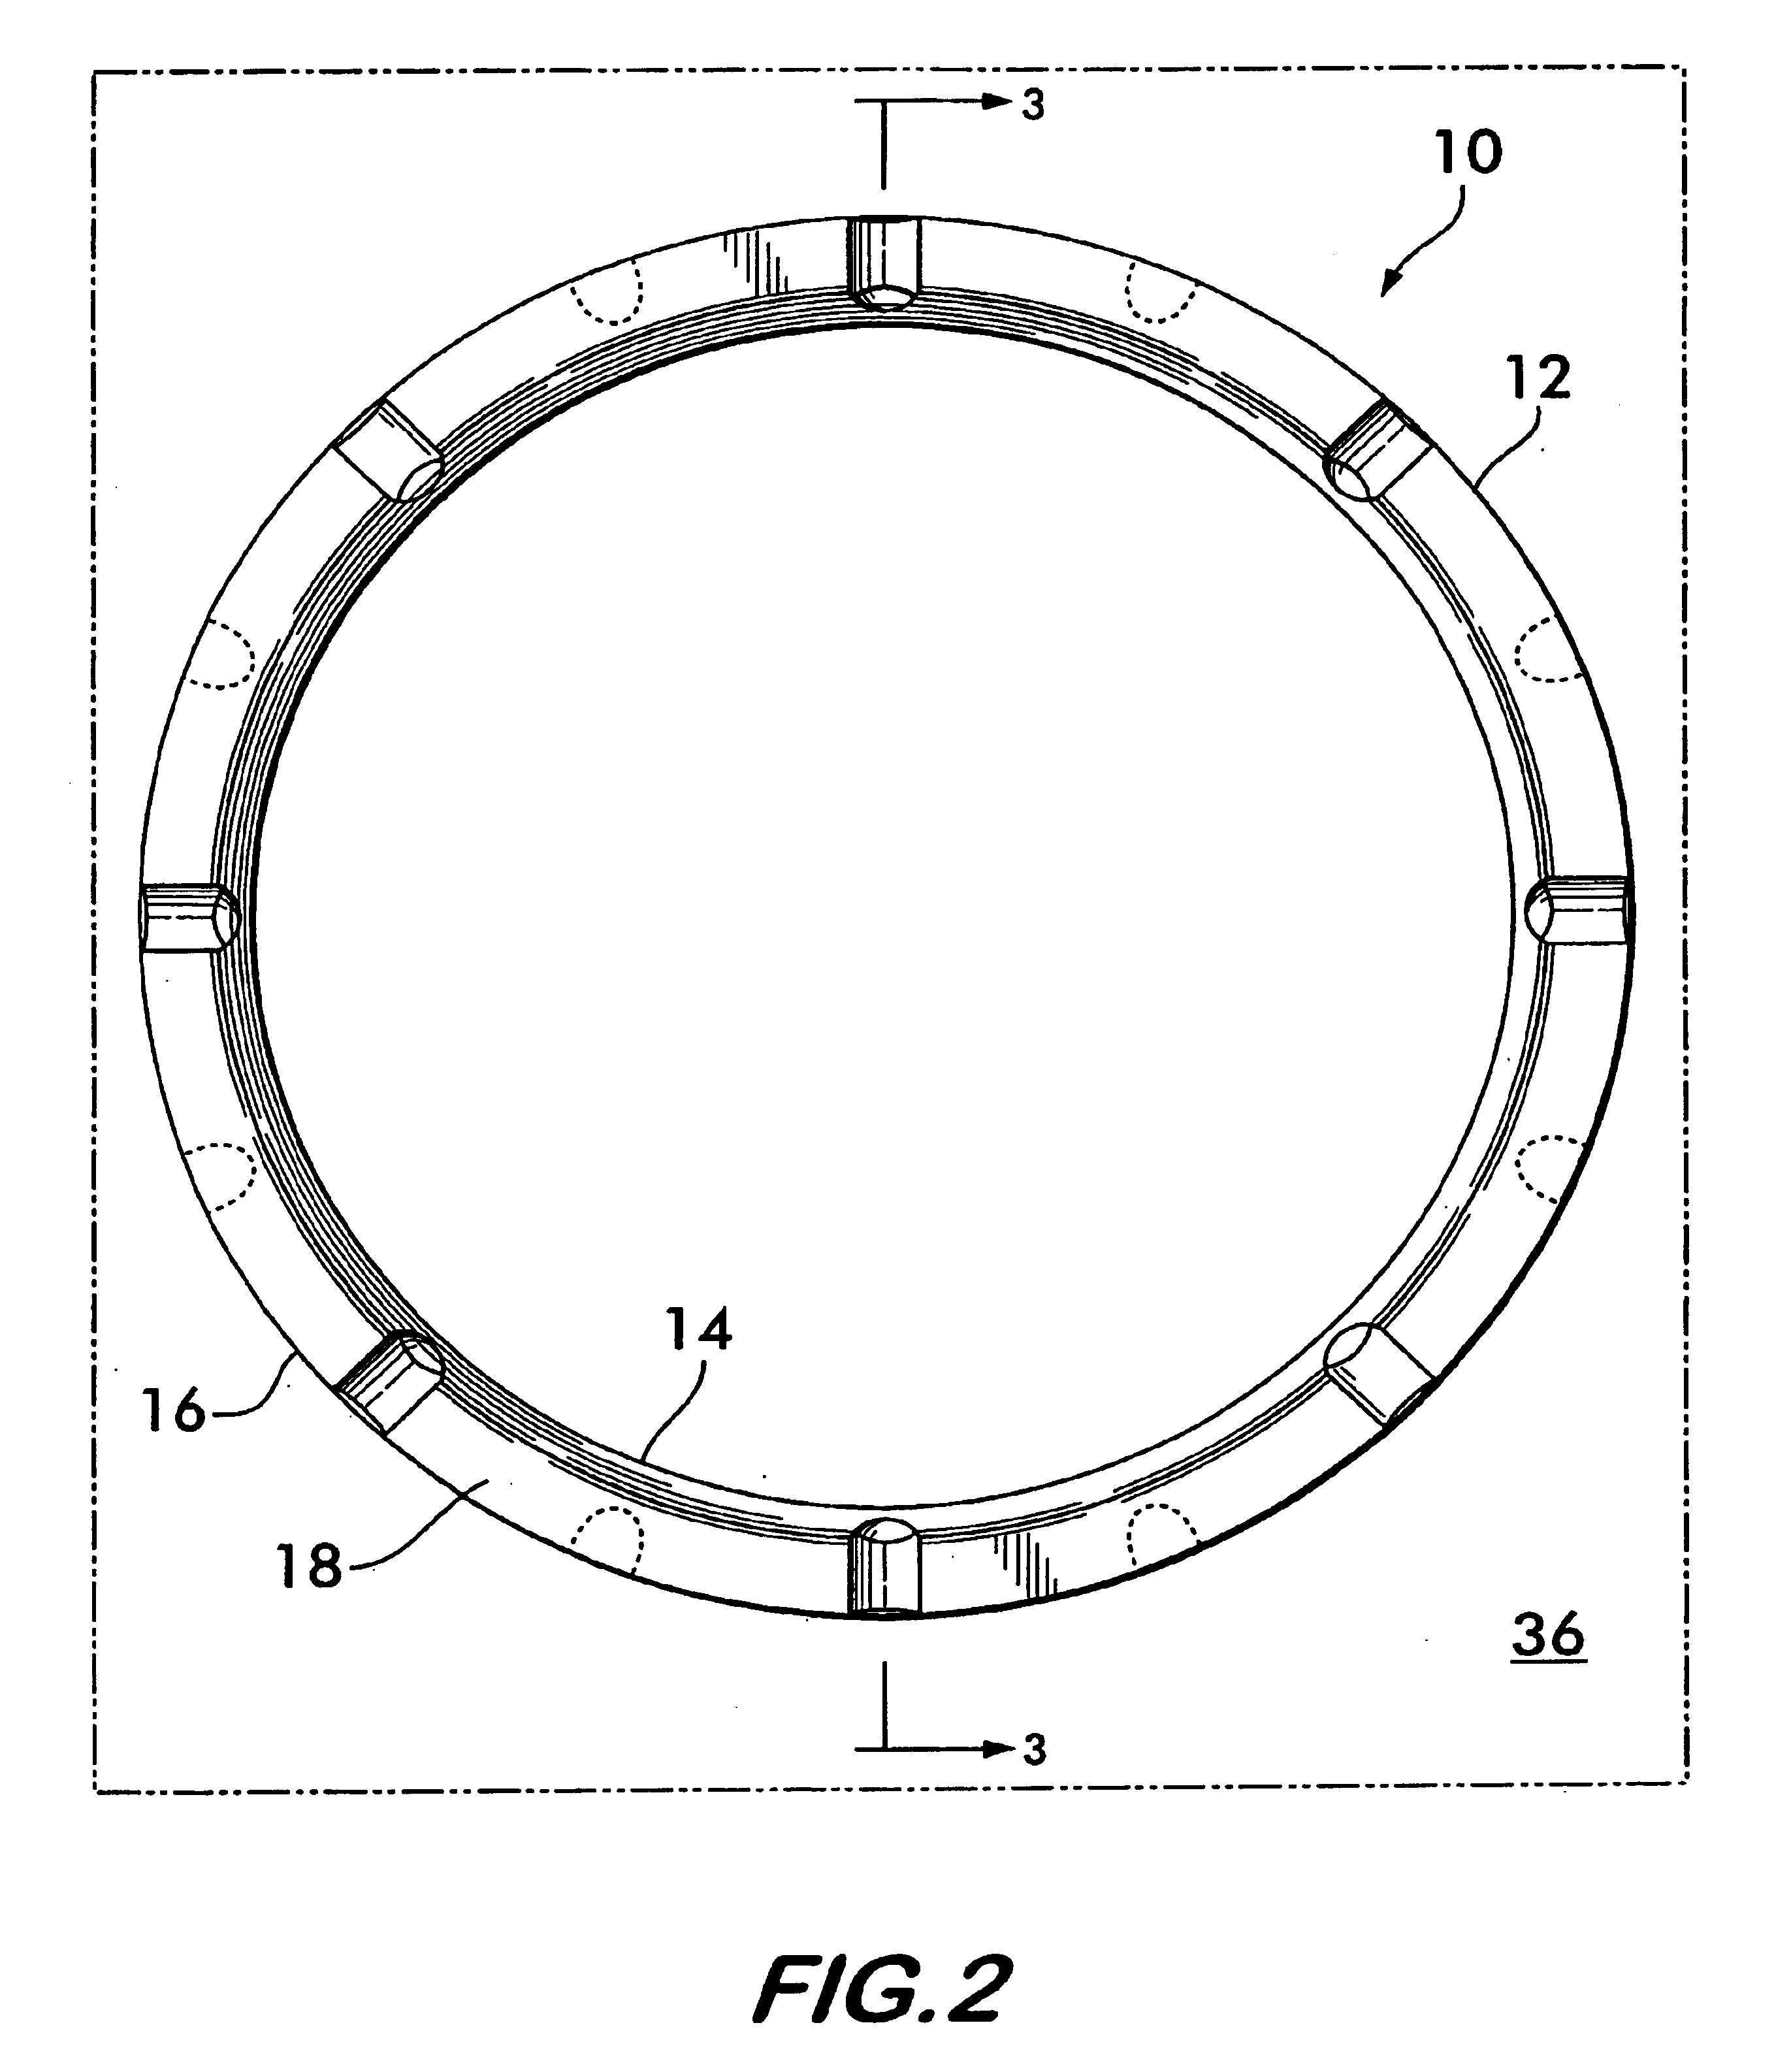 Valve seal with pressure relief channels and expansion voids